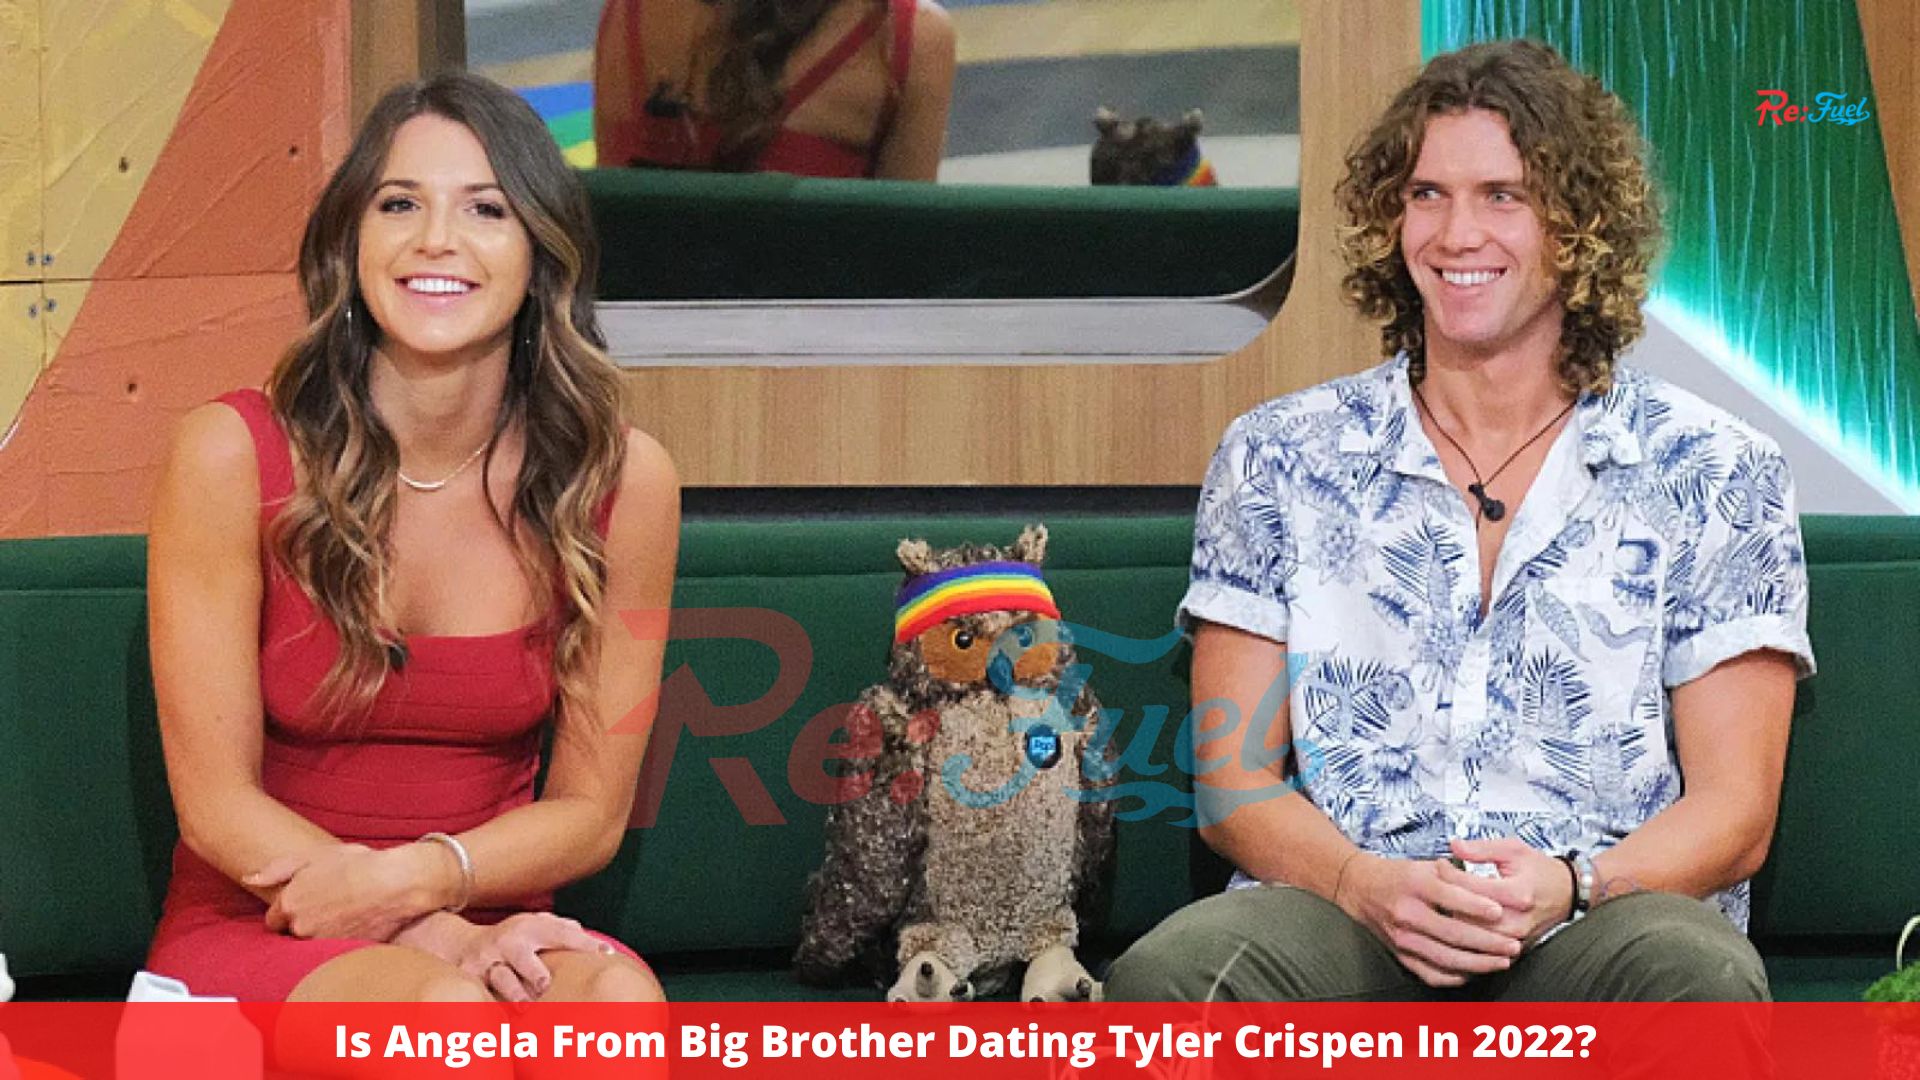 Is Angela From Big Brother Dating Tyler Crispen In 2022?